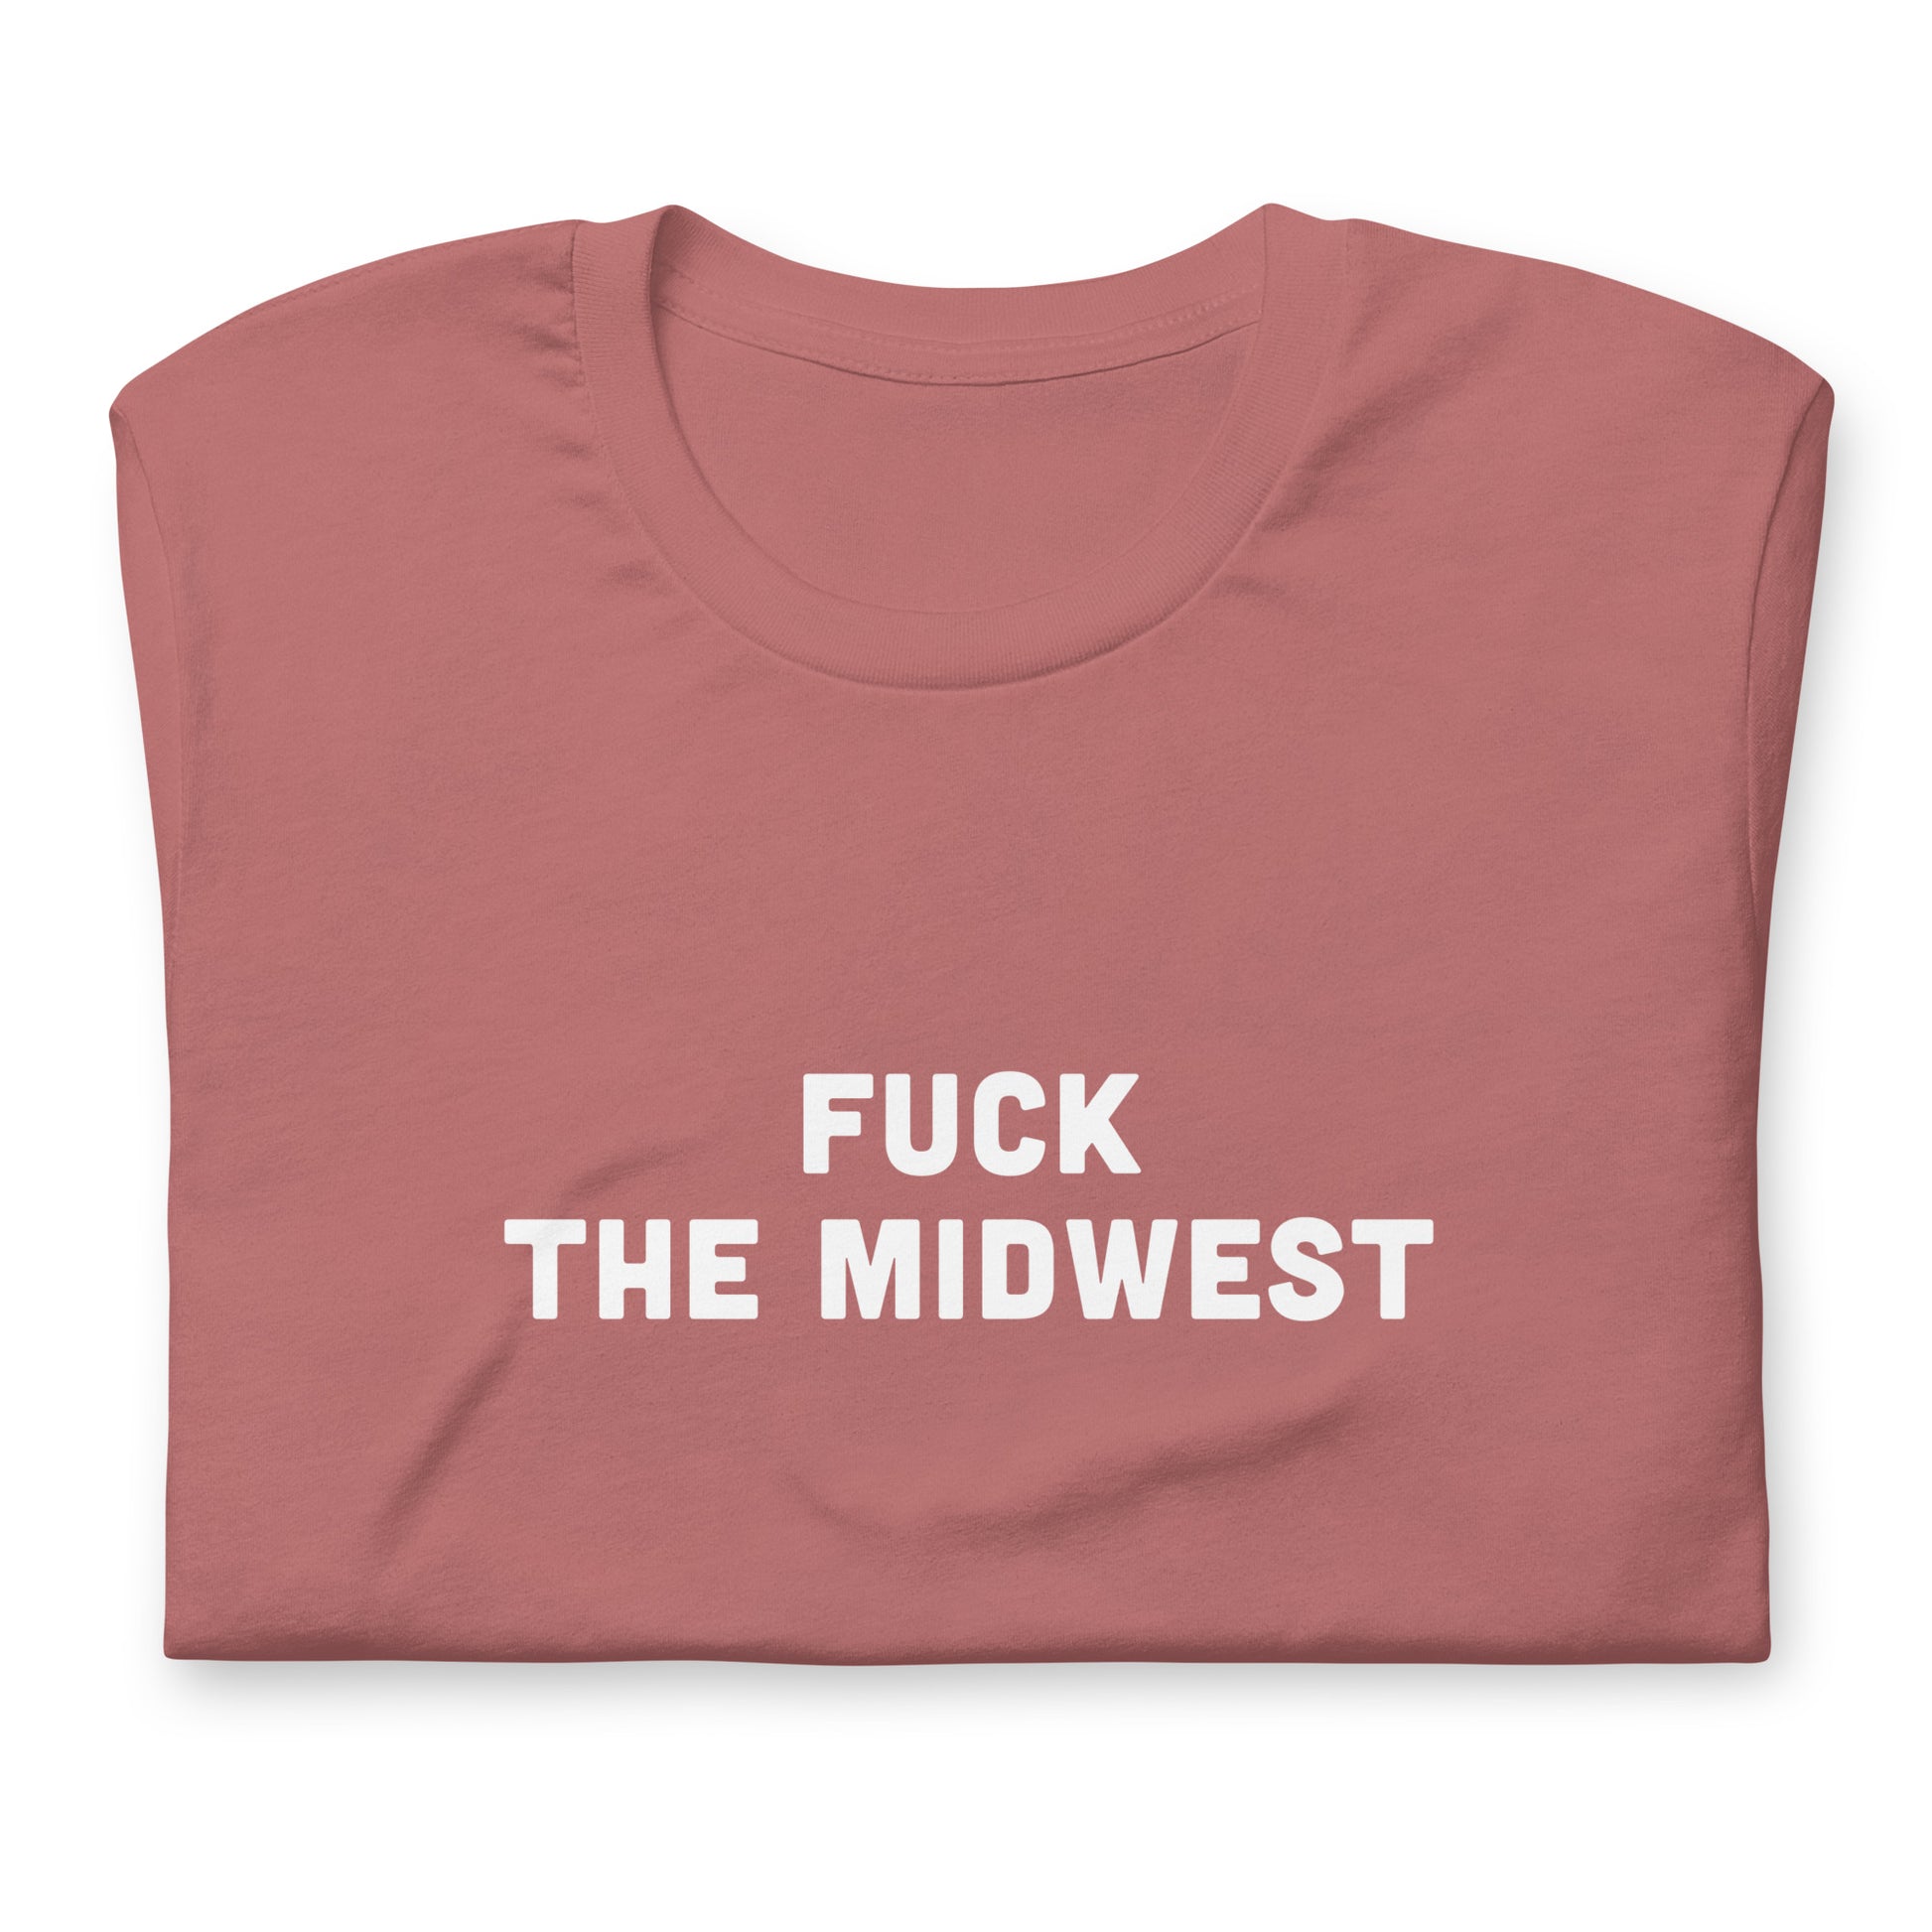 Fuck The Midwest T-Shirt Size XL Color Navy